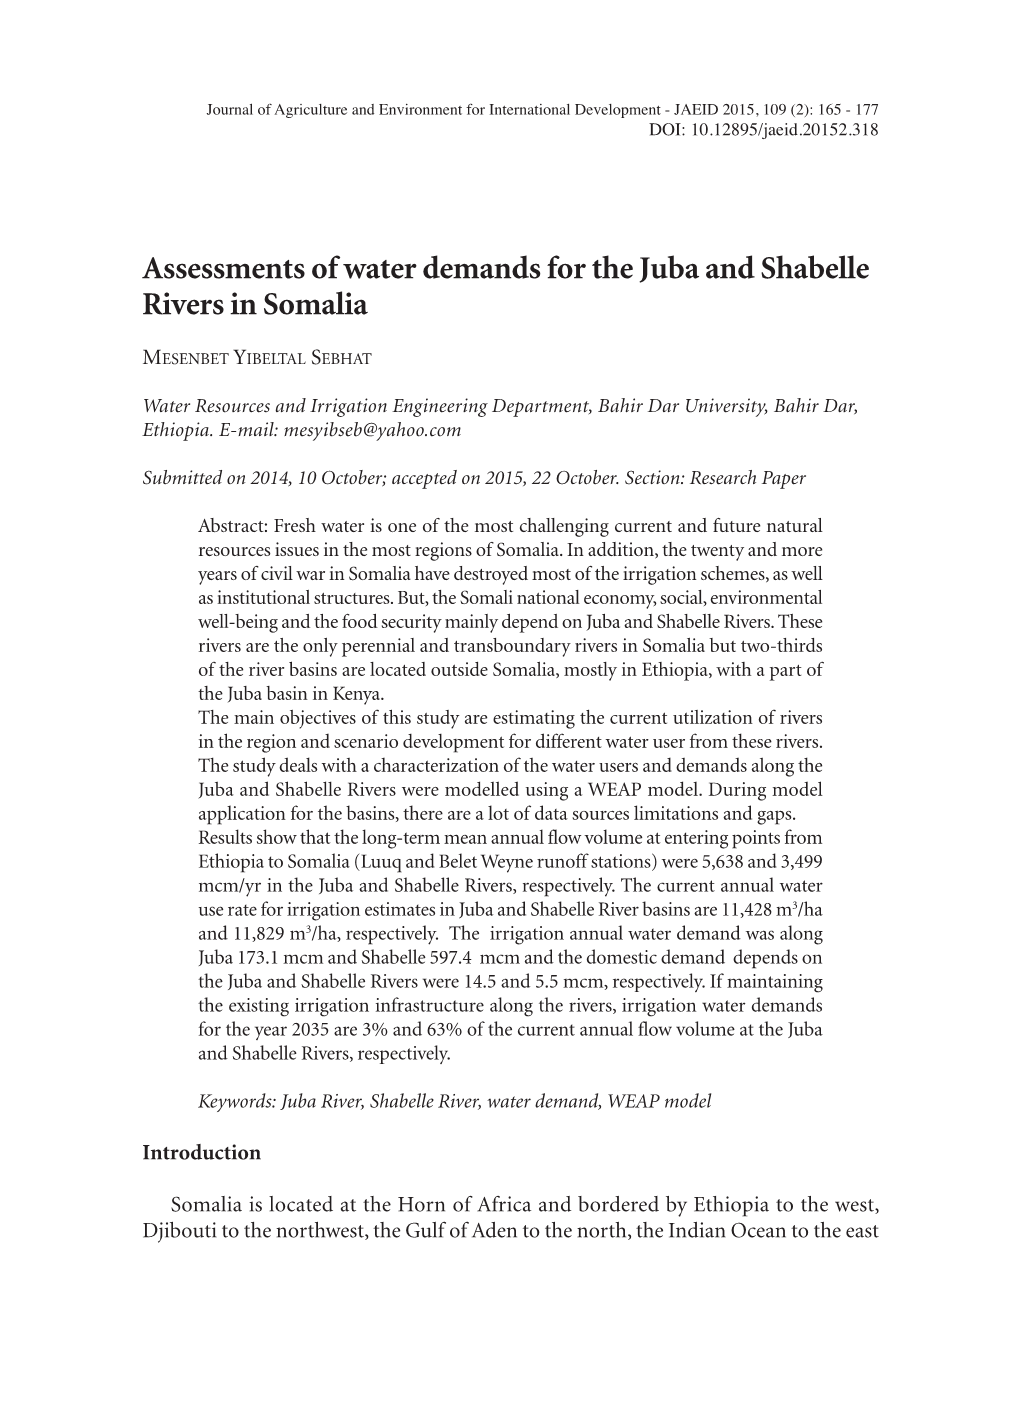 Assessments of Water Demands for the Juba and Shabelle Rivers in Somalia